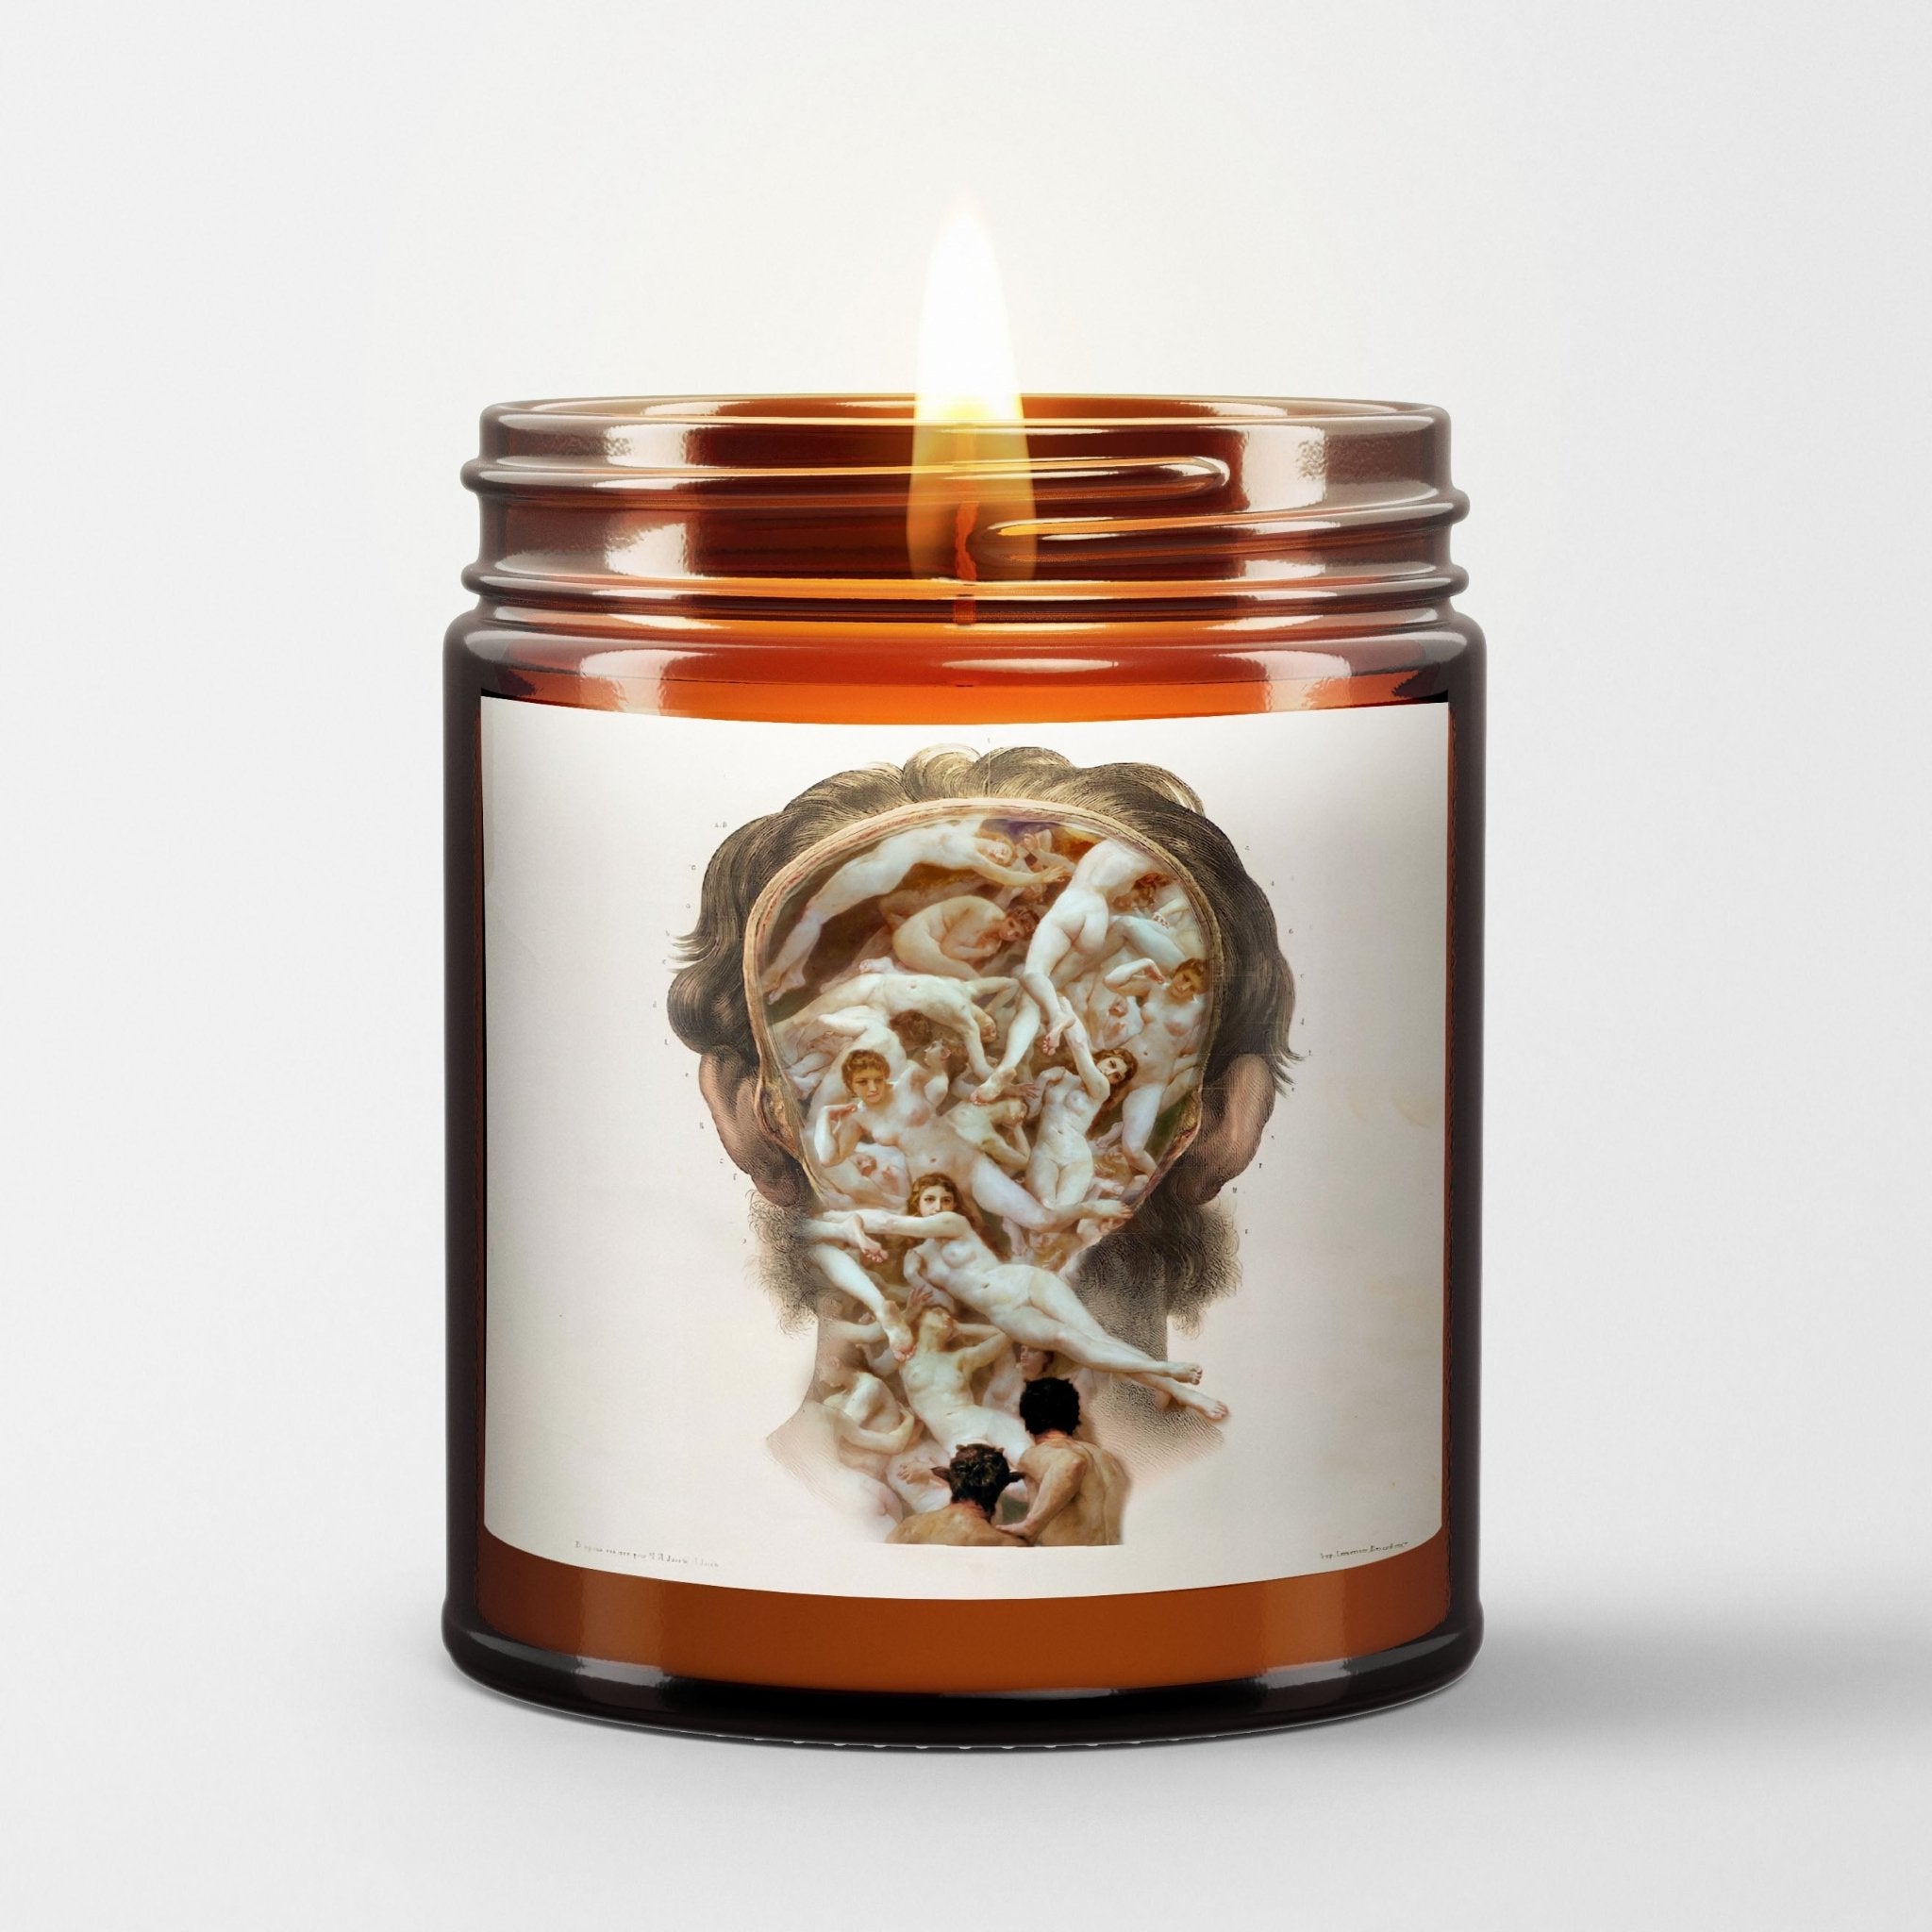 Welder Wings Scented Candle in Amber Glass Jar: The Ephemeral Balancers - Candlefy